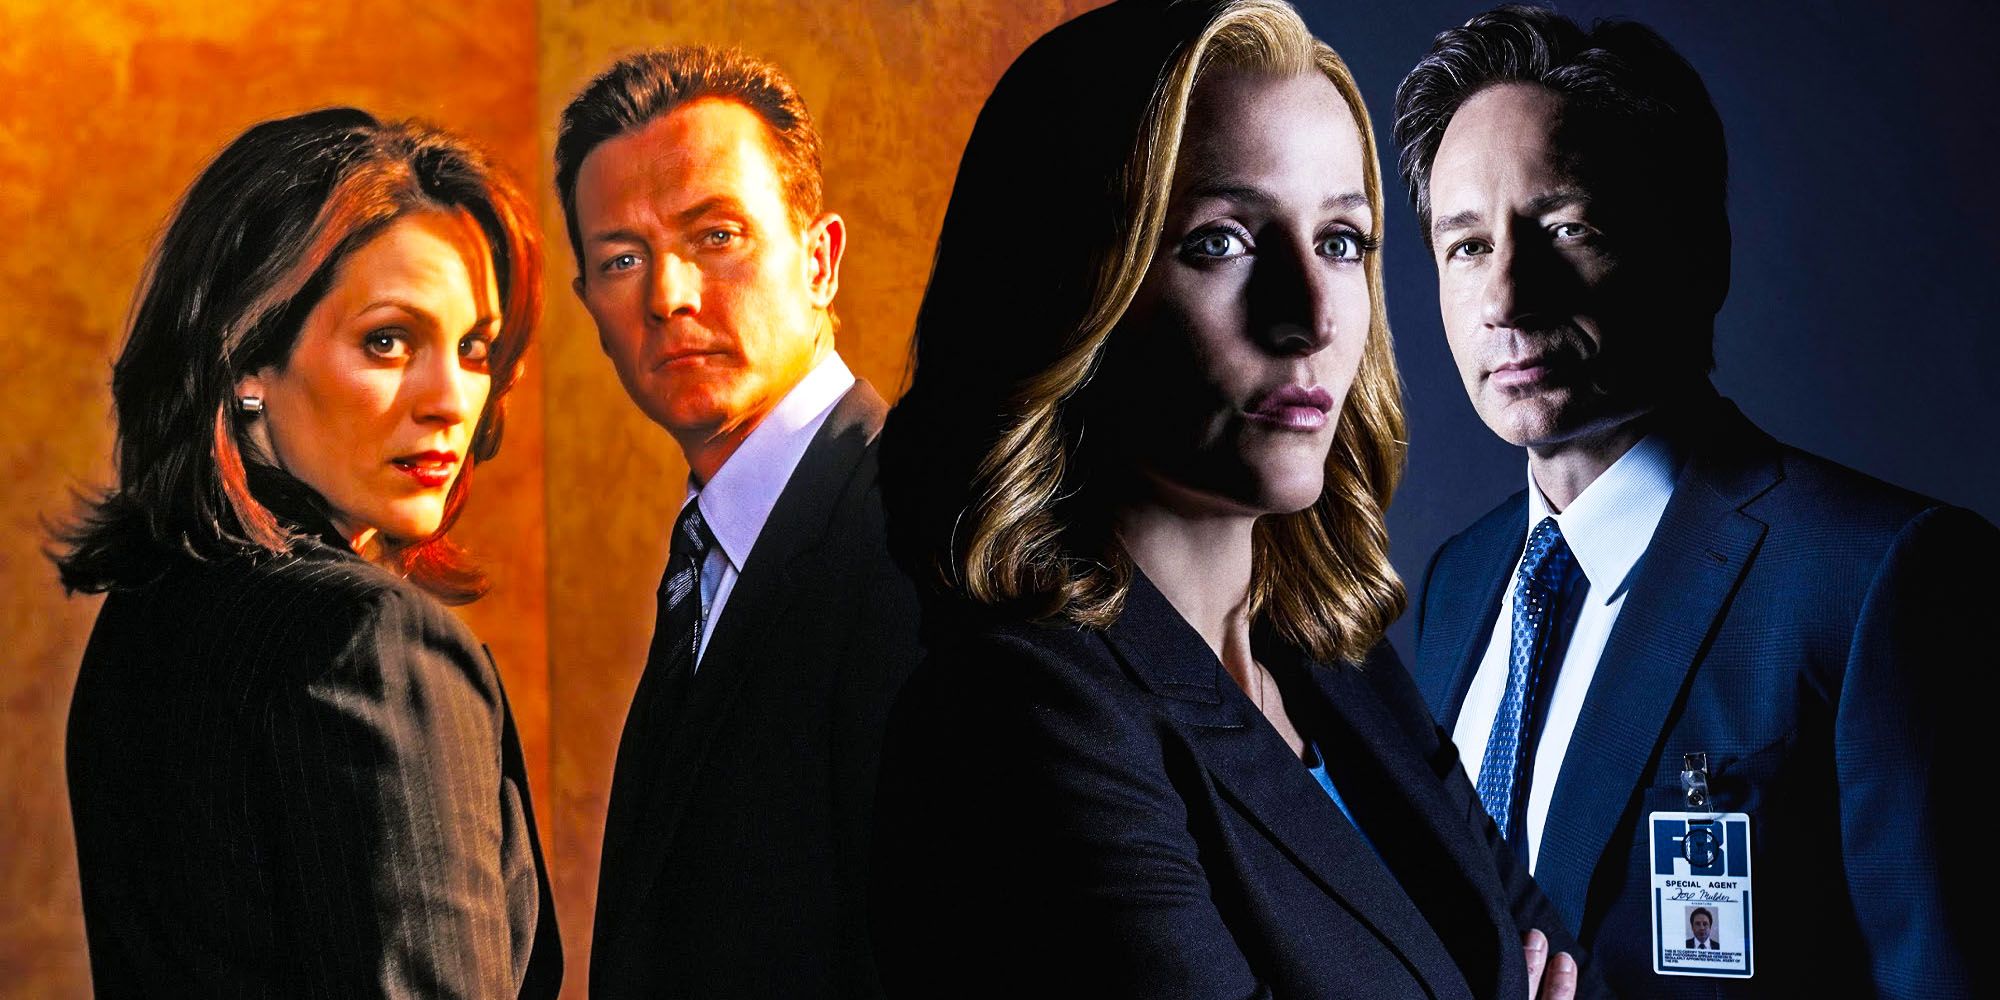 x-files-what-happened-to-mulder-scully-every-fbi-agent